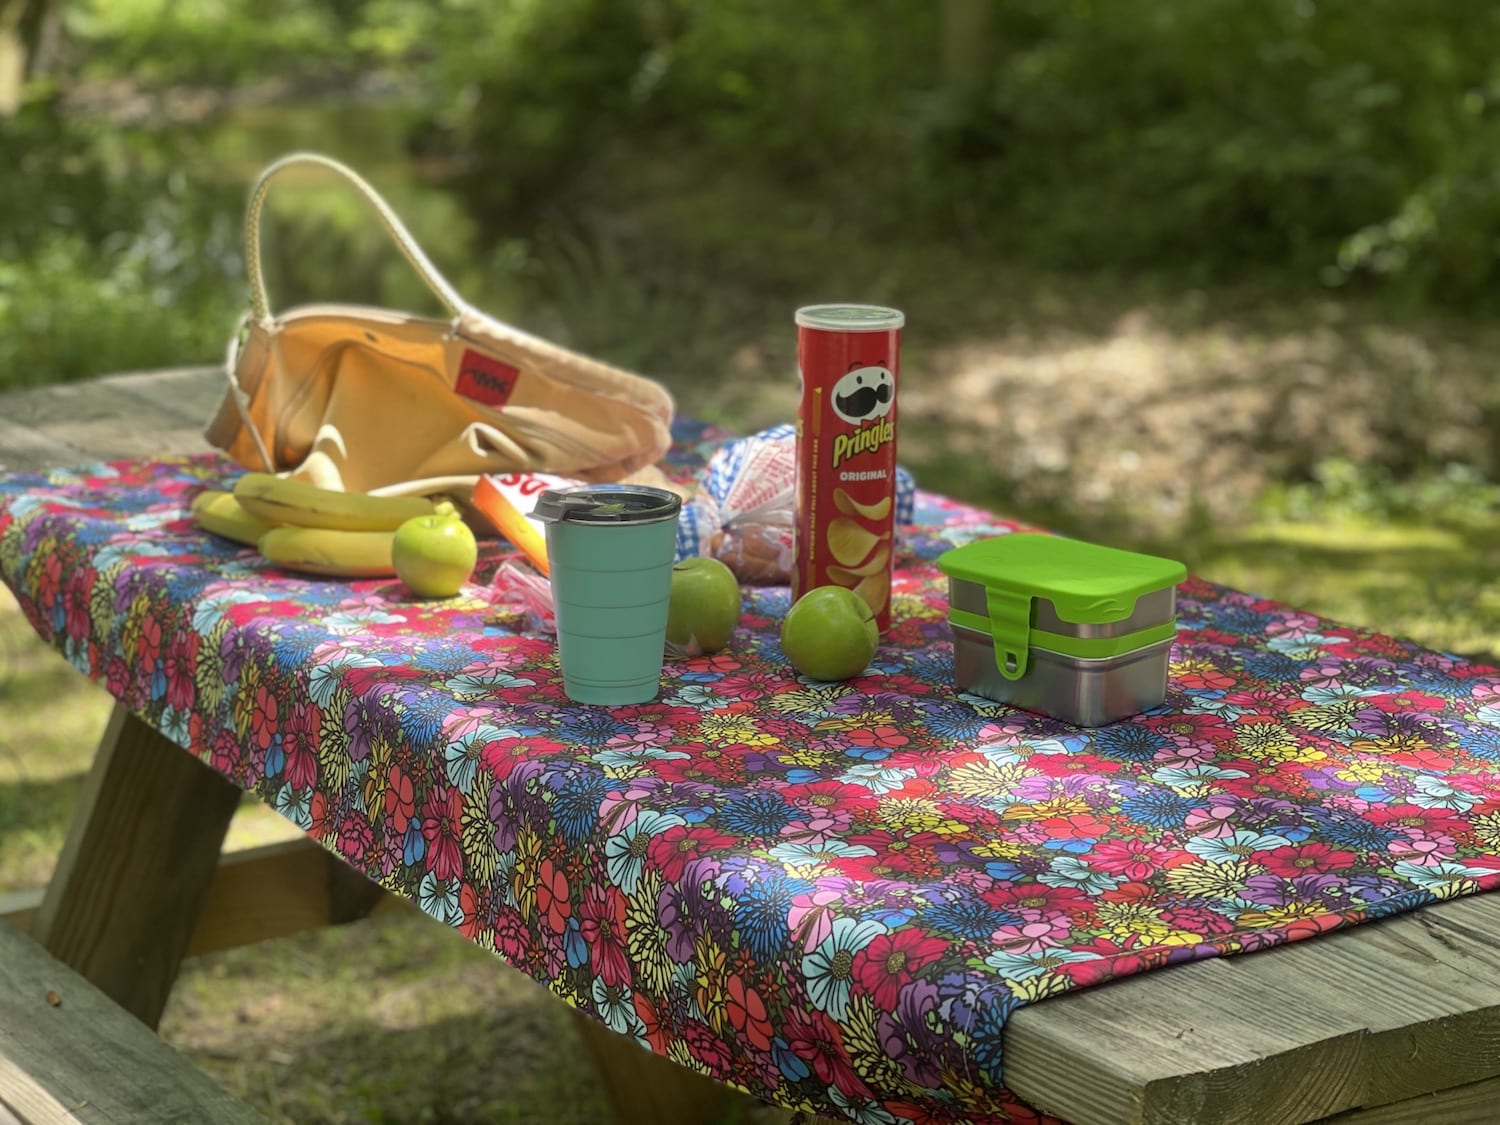 What Size Of Tablecloth Is Needed For A Picnic Table?